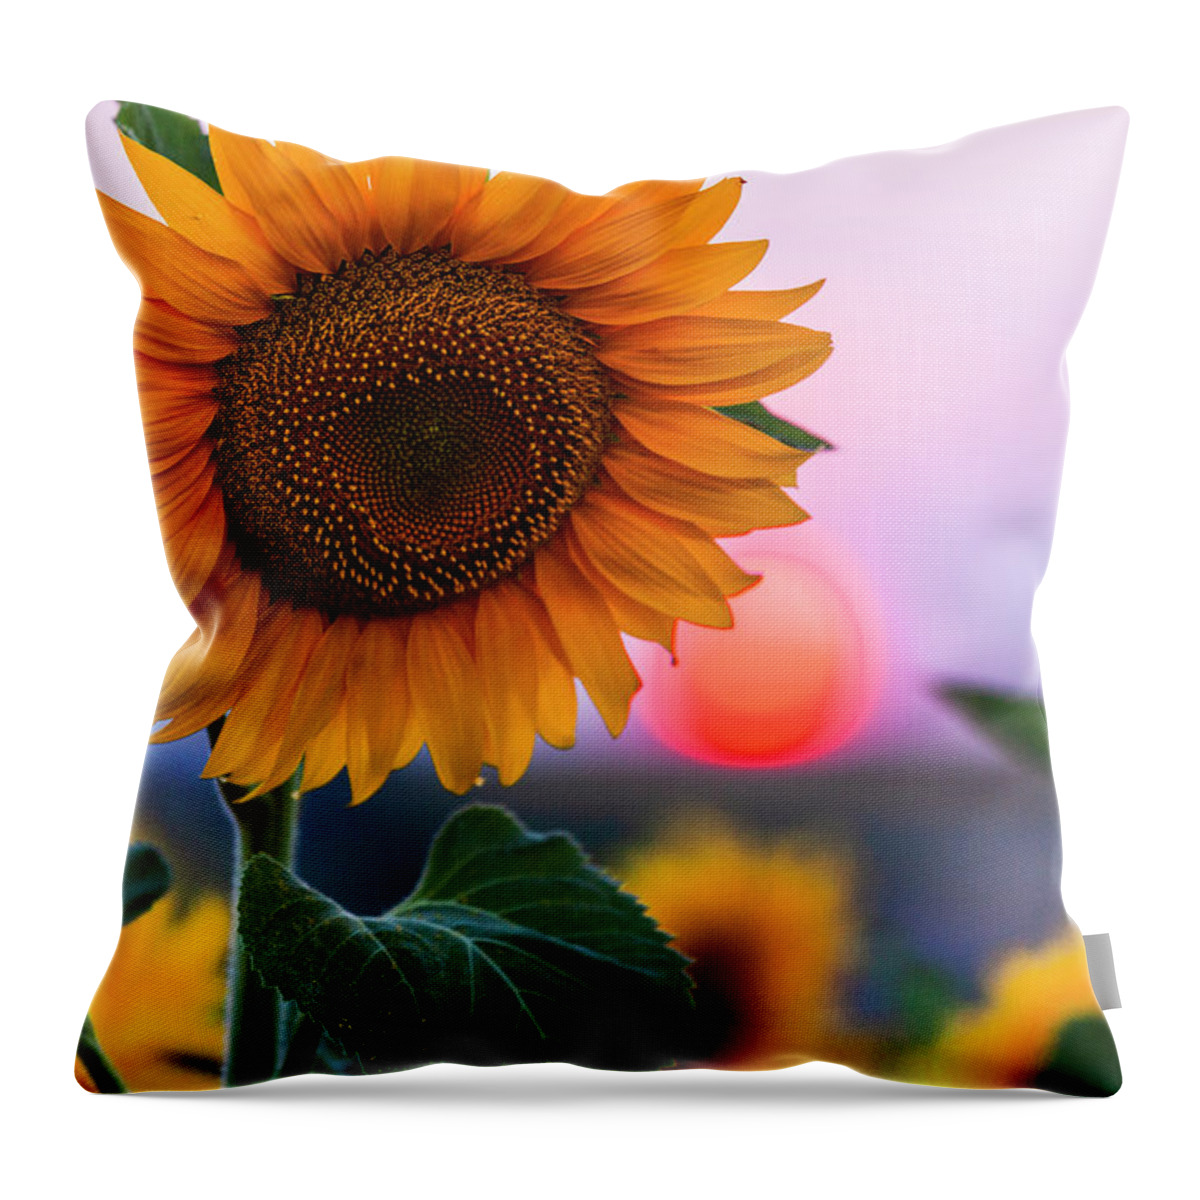 Bulgaria Throw Pillow featuring the photograph Sunflower by Evgeni Dinev